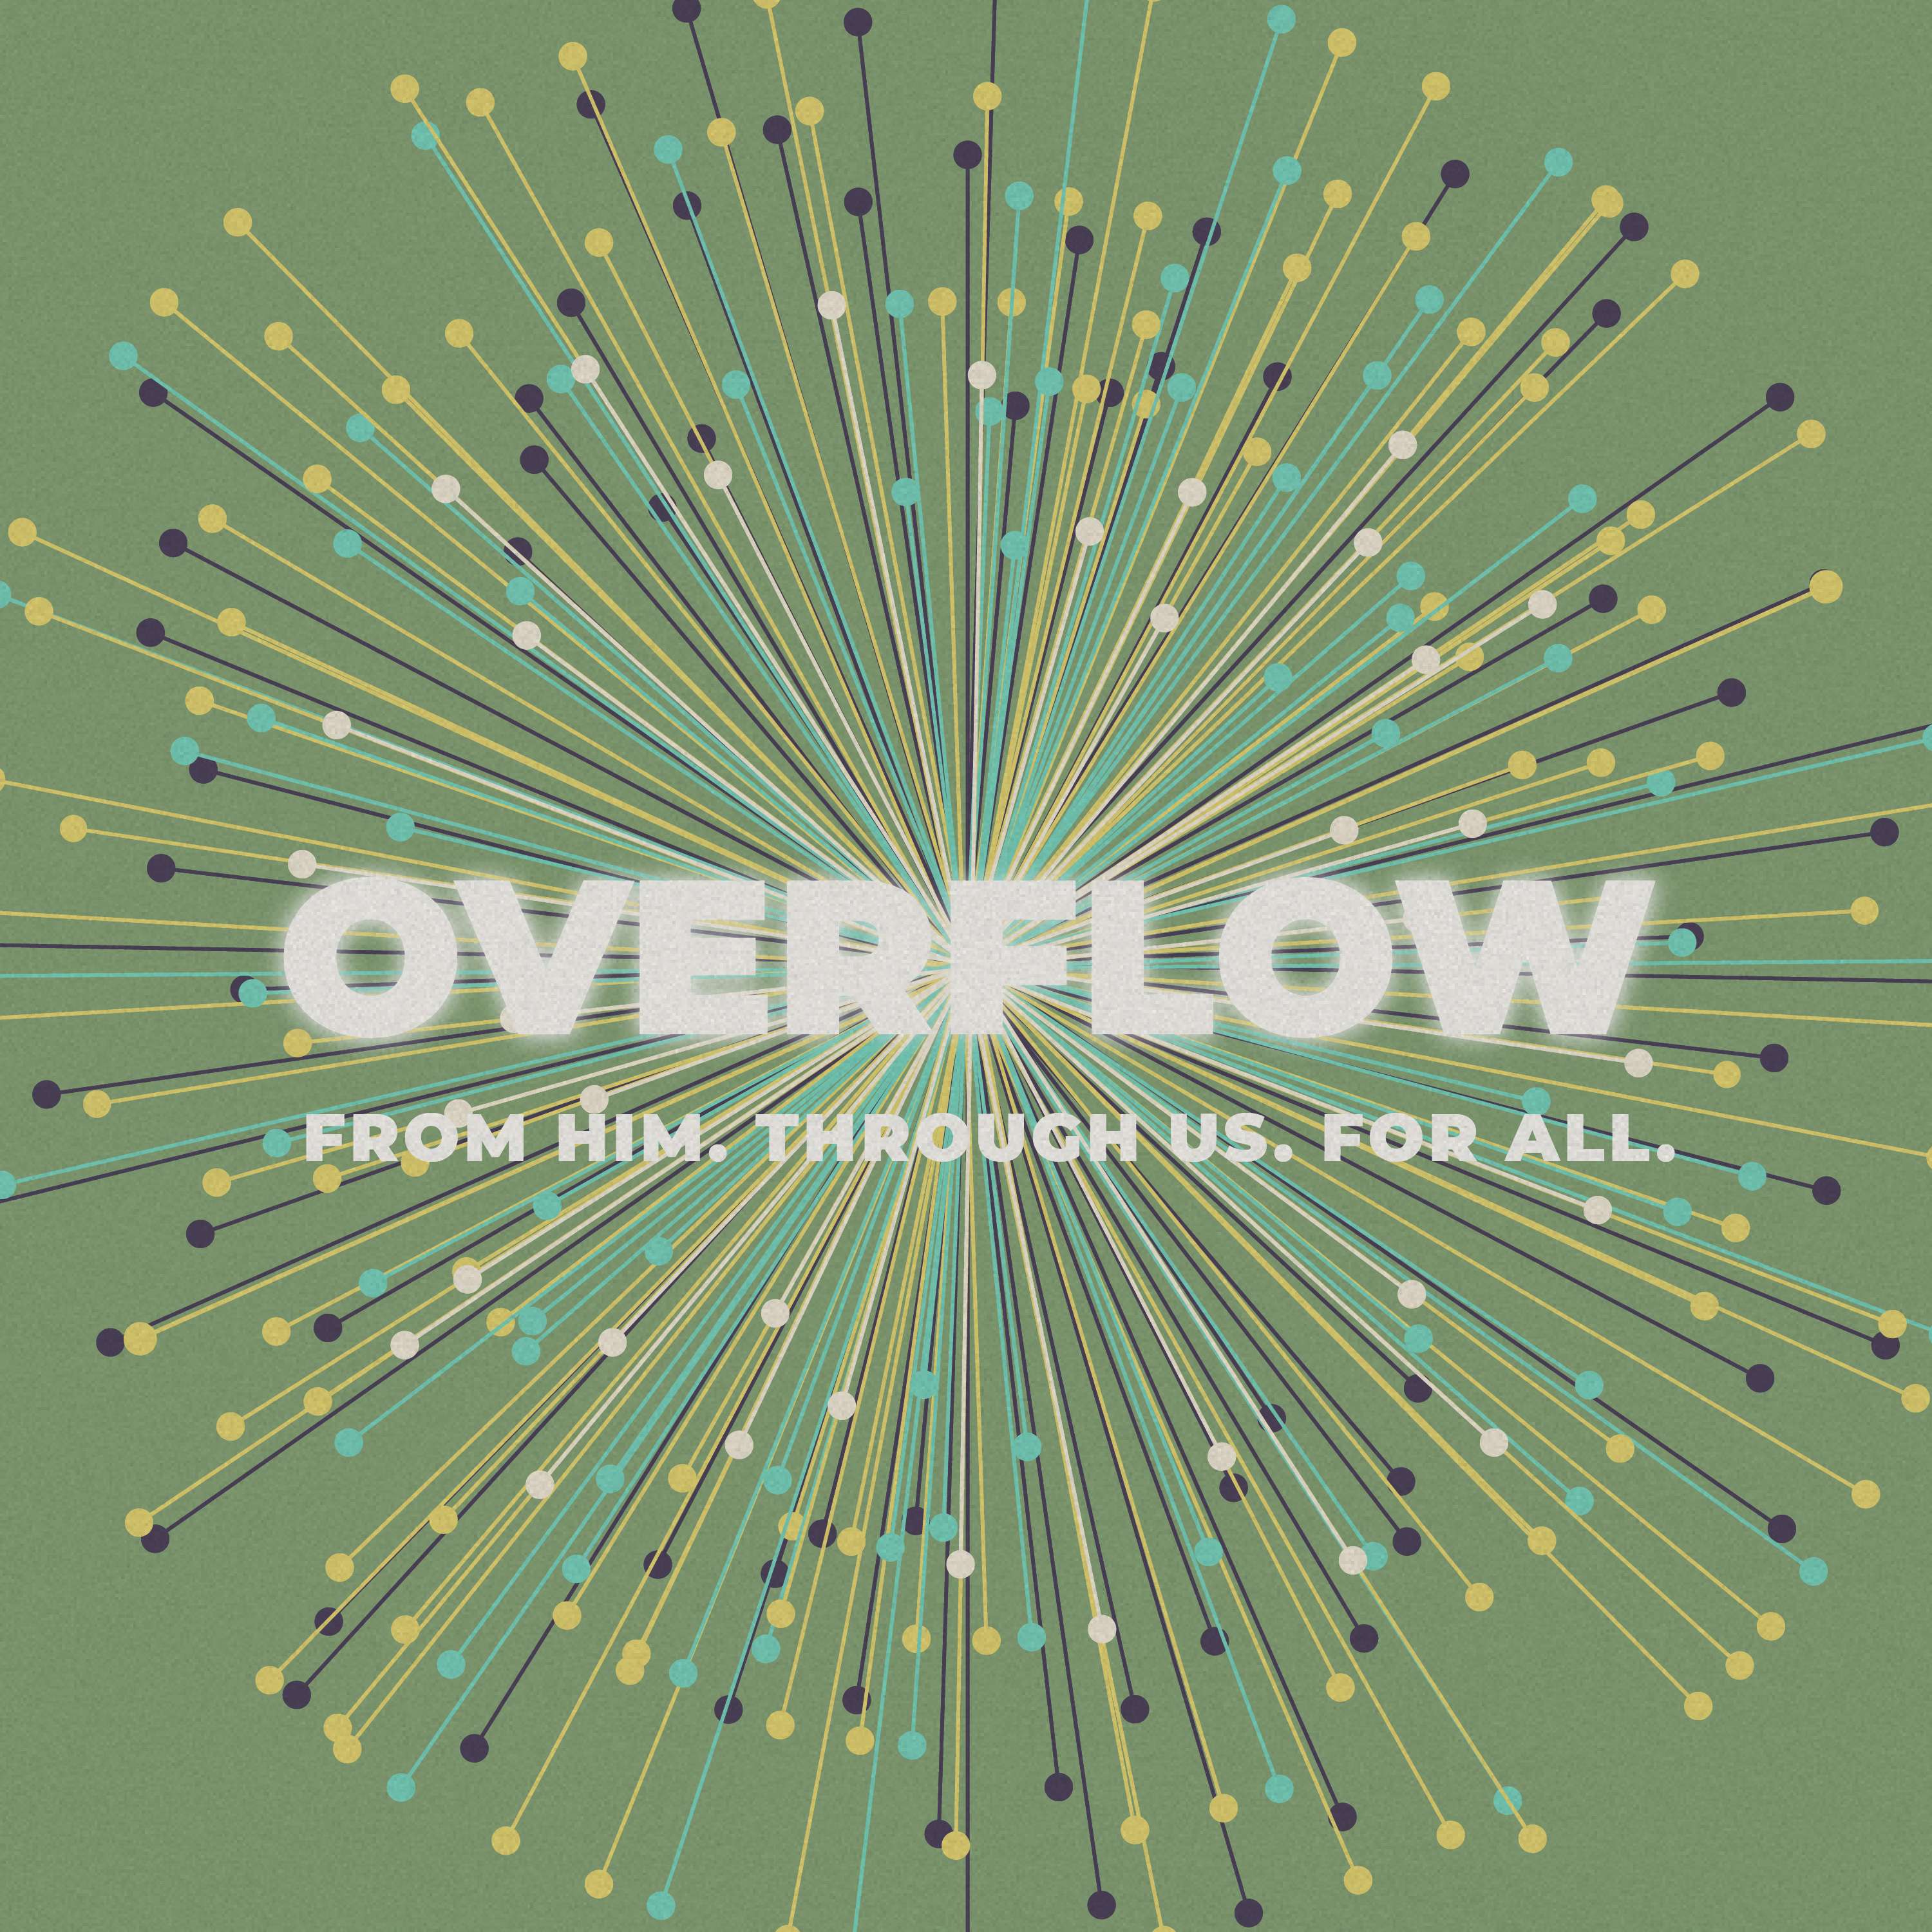 Overflow: From Him, Through Us, For All: Part 2 – Woodside Bible Church